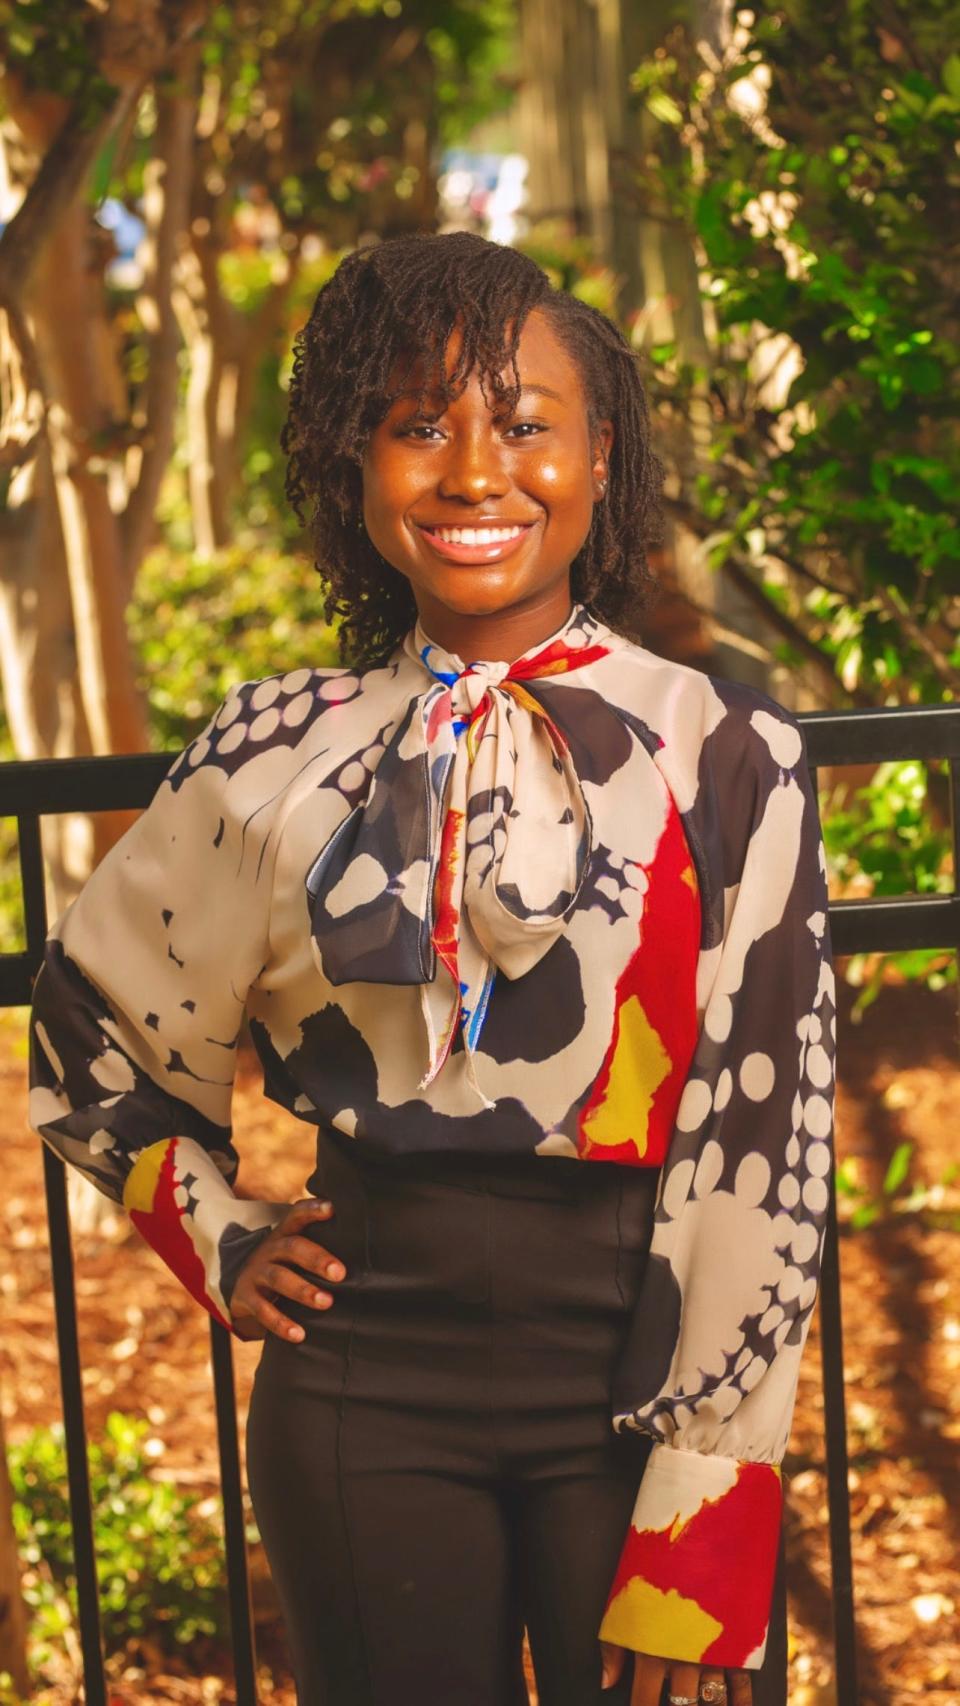 Tyhlar Ann Holliway is one of eight honorees for the 2023 Virginia K. Shehee Most Influential Young Woman Awards taking place on Thursday, March 9.